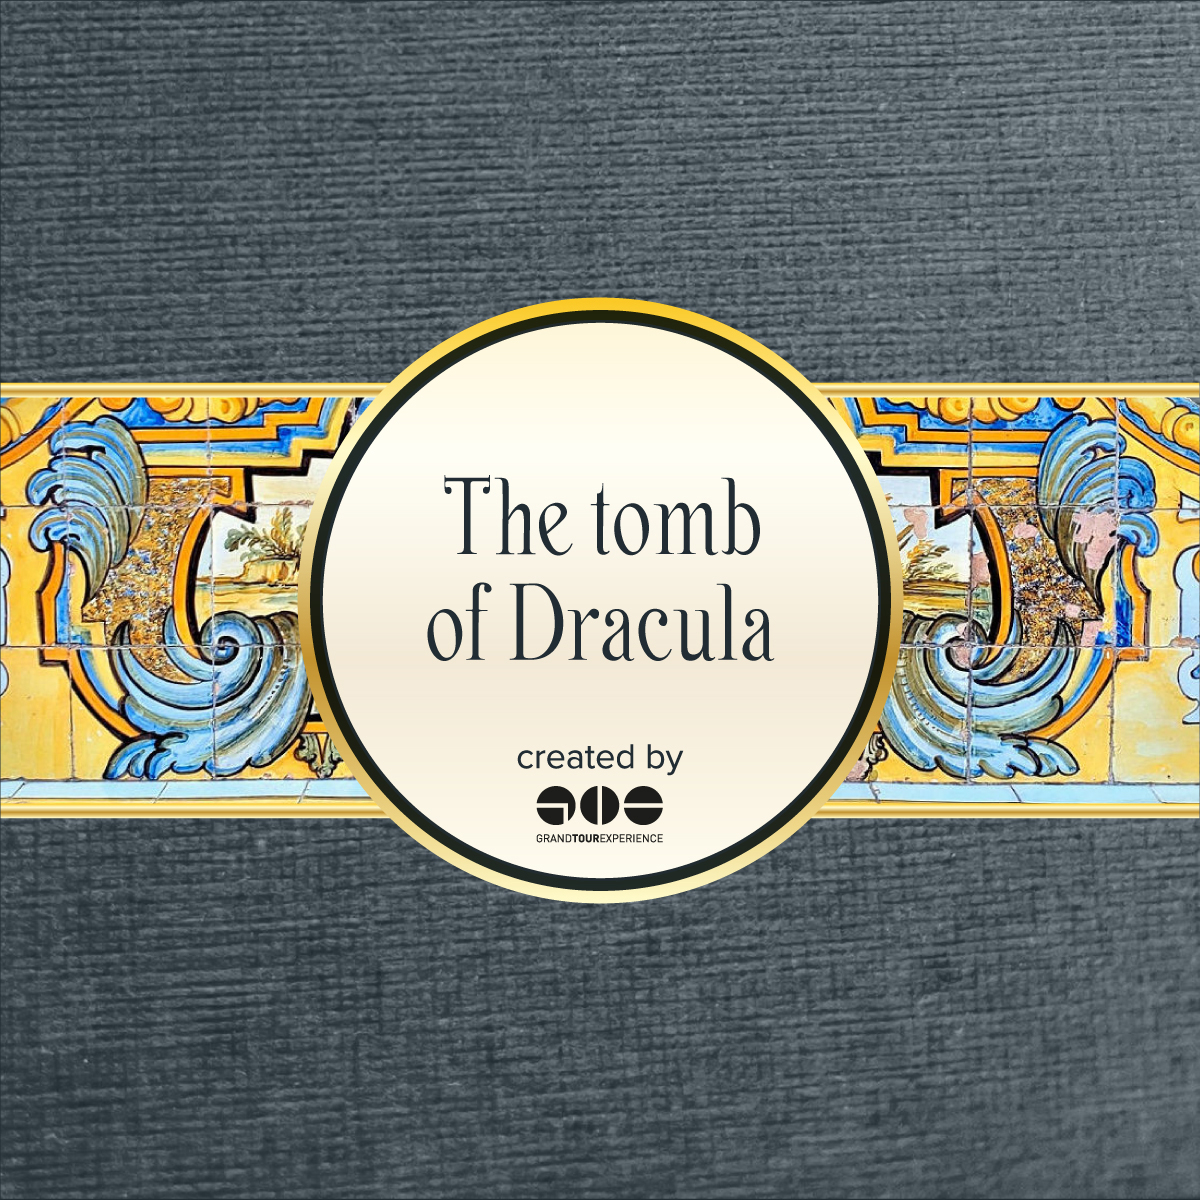 The Mysteries of Naples Saga: the Tomb of Dracula